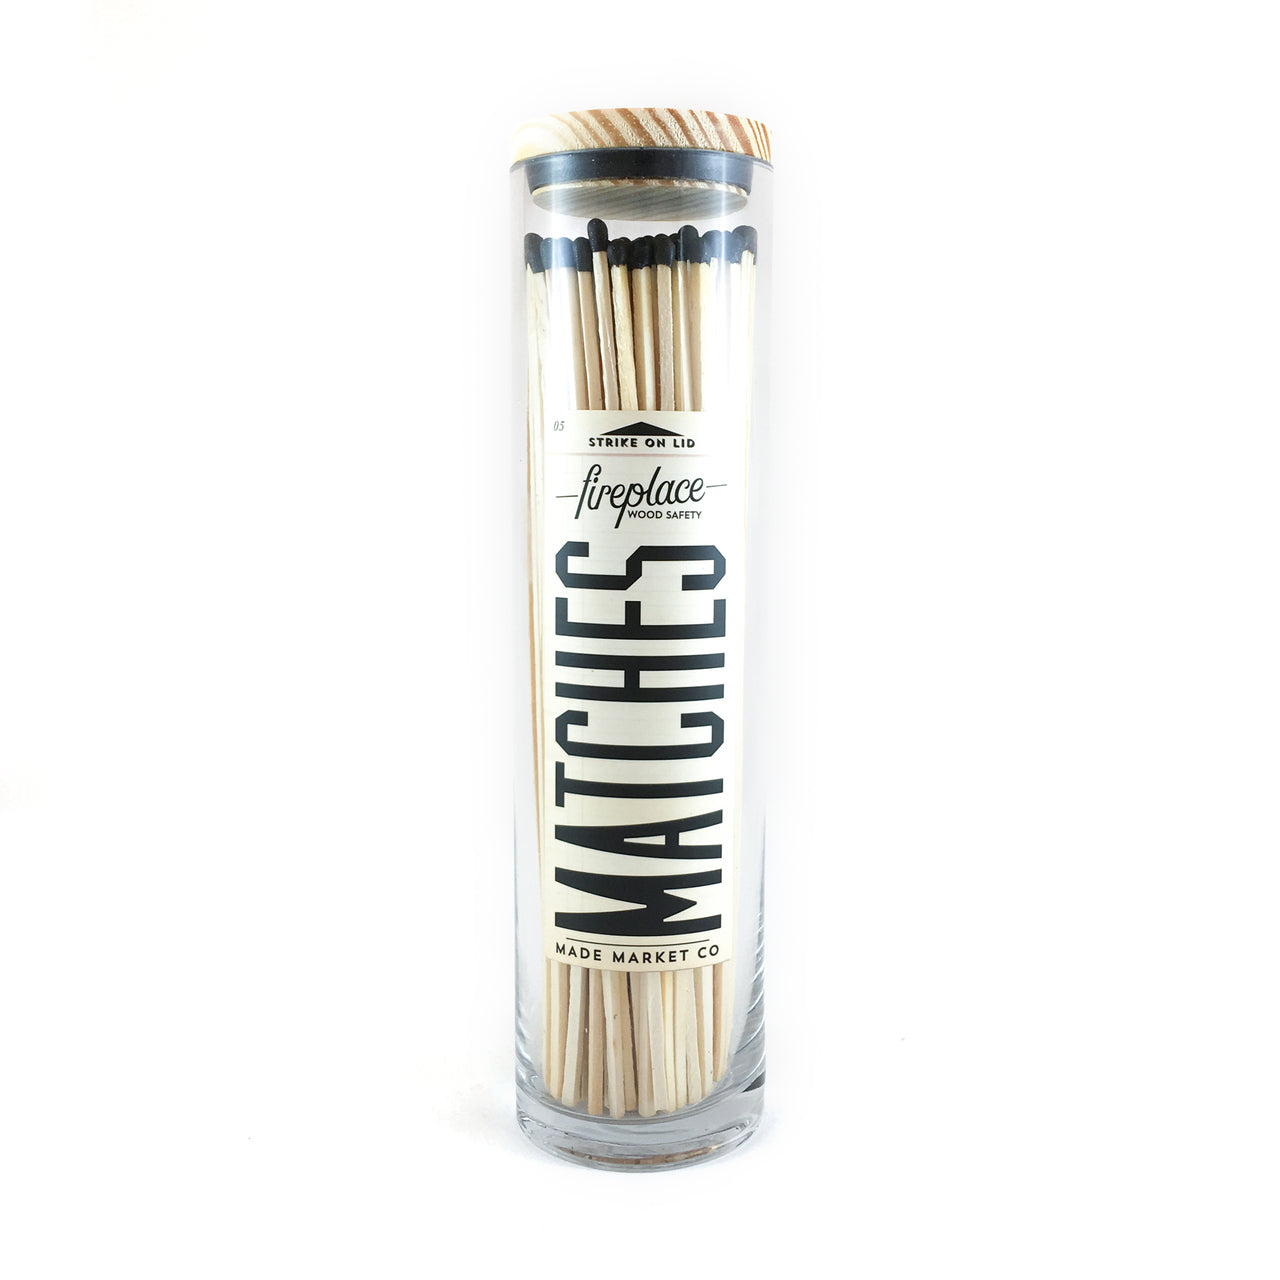 Made Market Co. | Fireplace Matches | Black